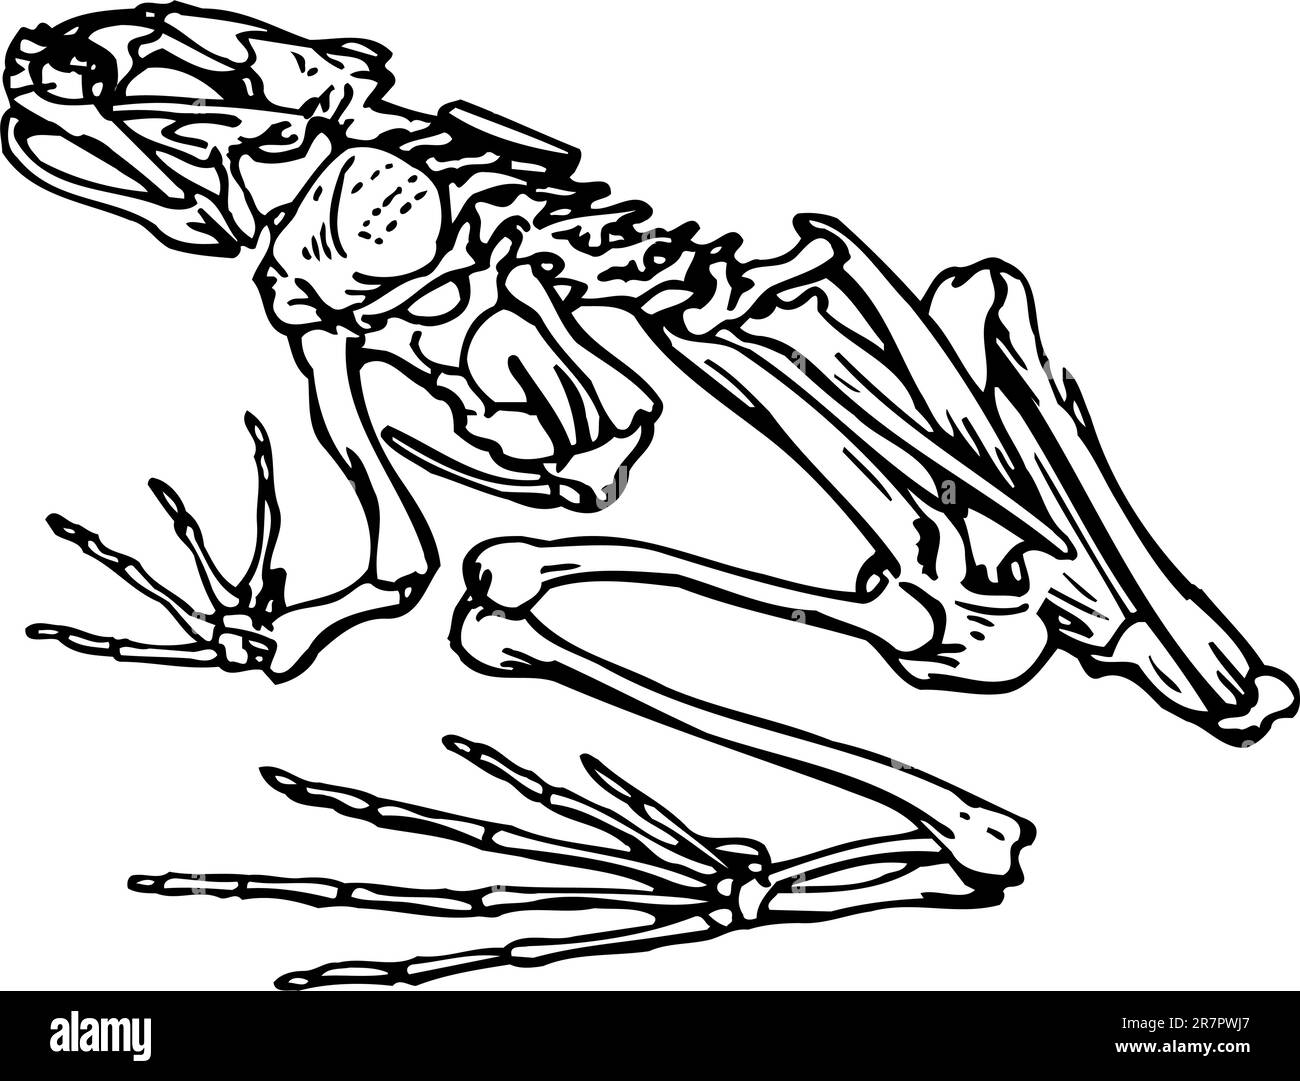 Skeleton of a frog isolated on white Stock Vector